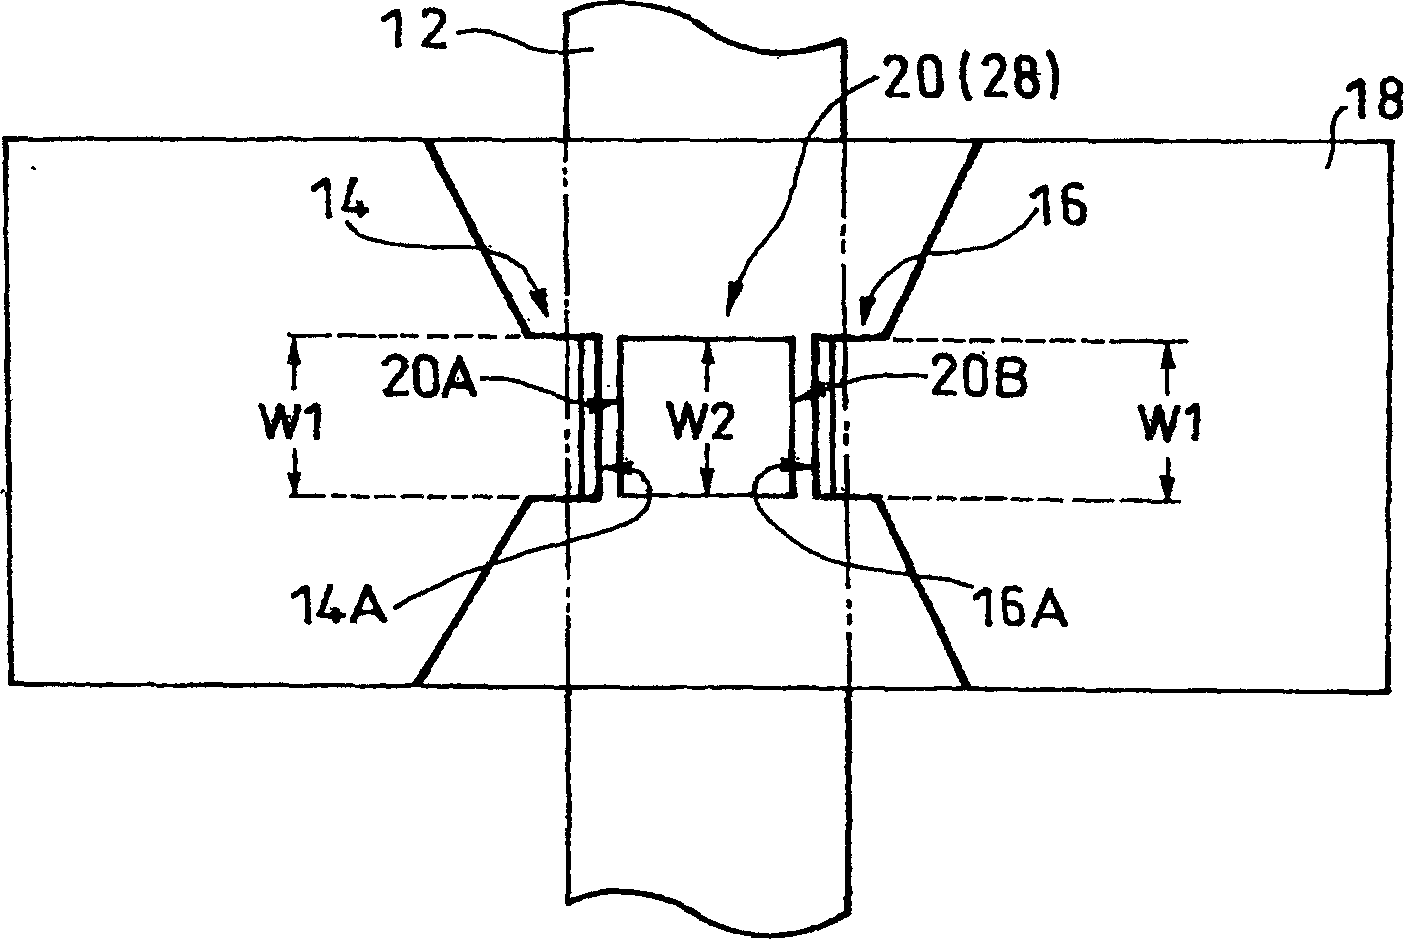 Magnetic storage device